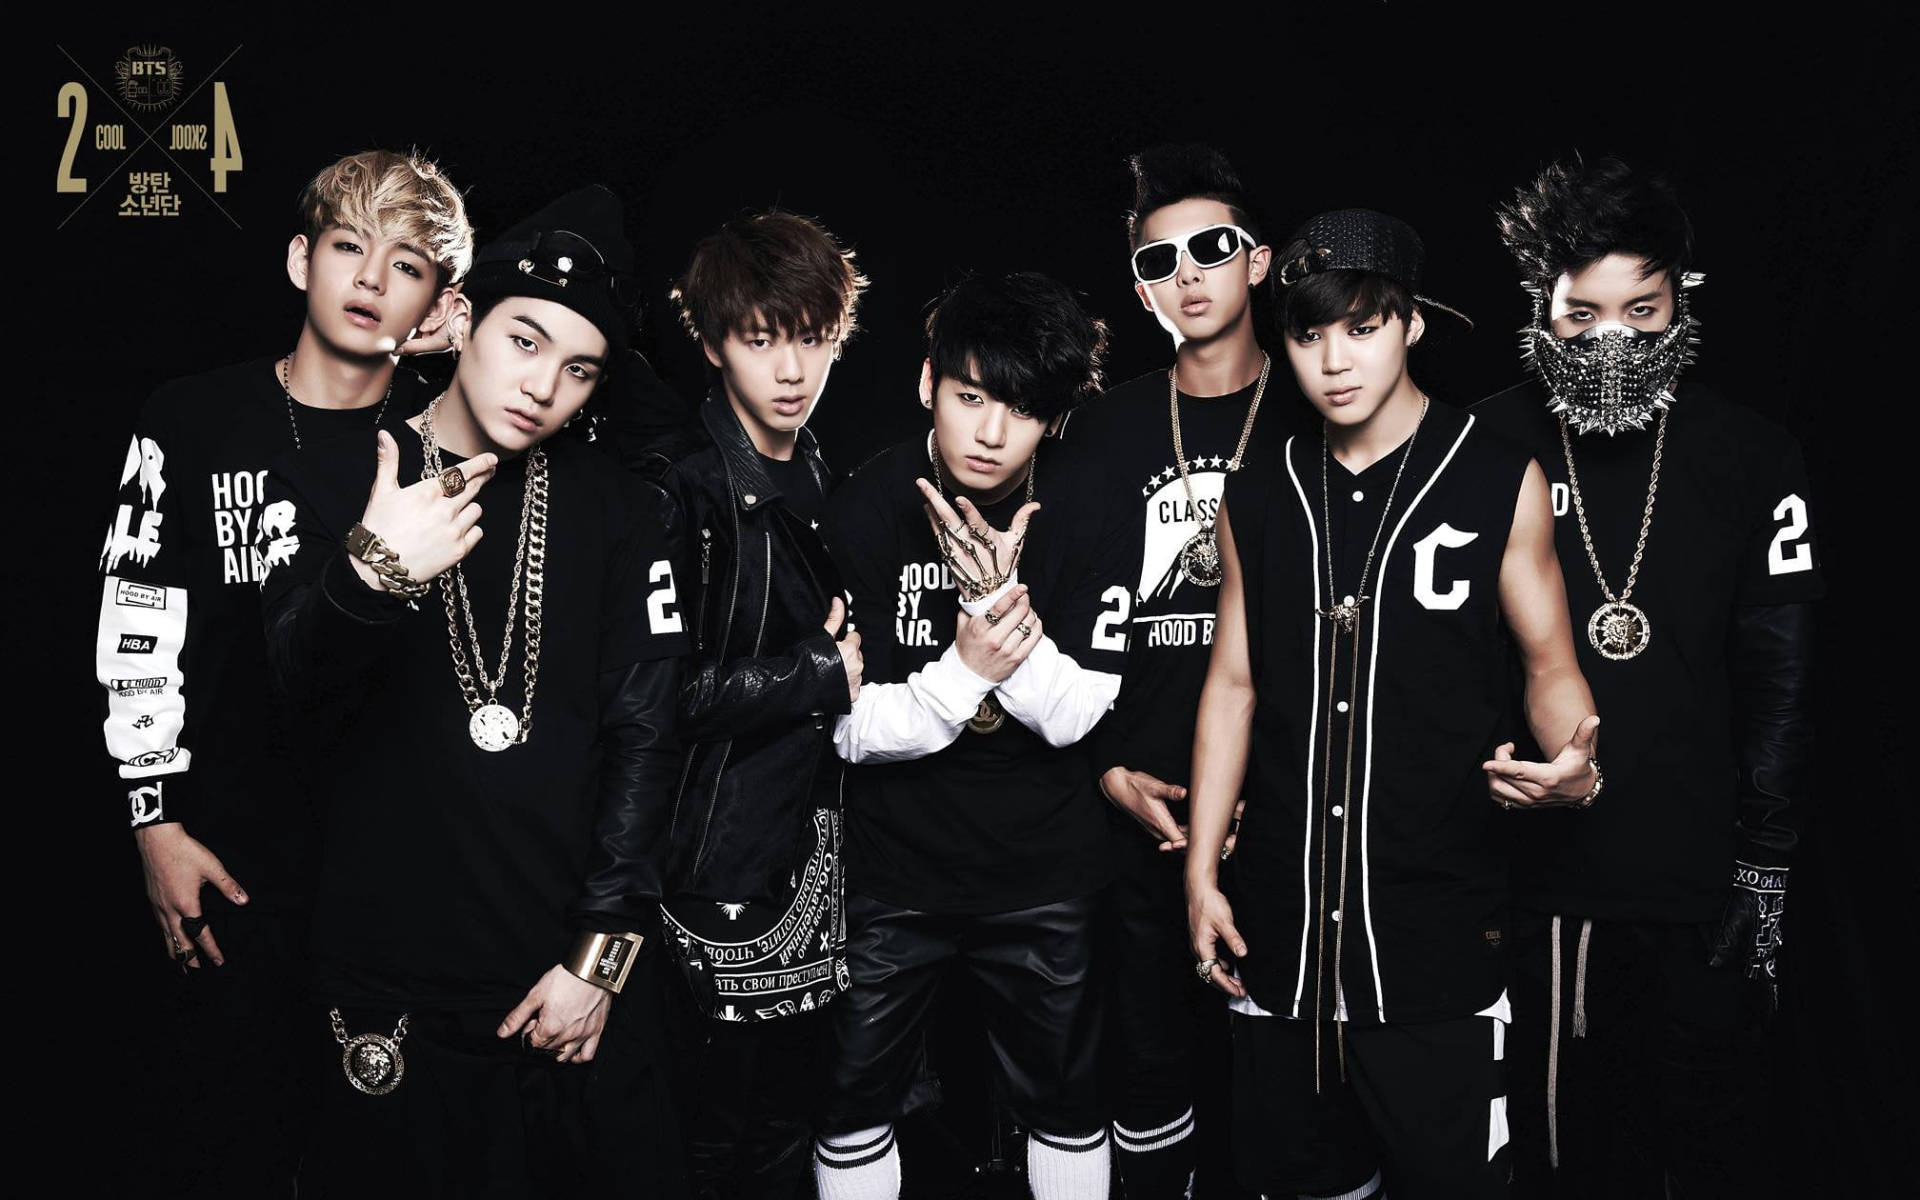 Bts Group Photo In Hip-hop